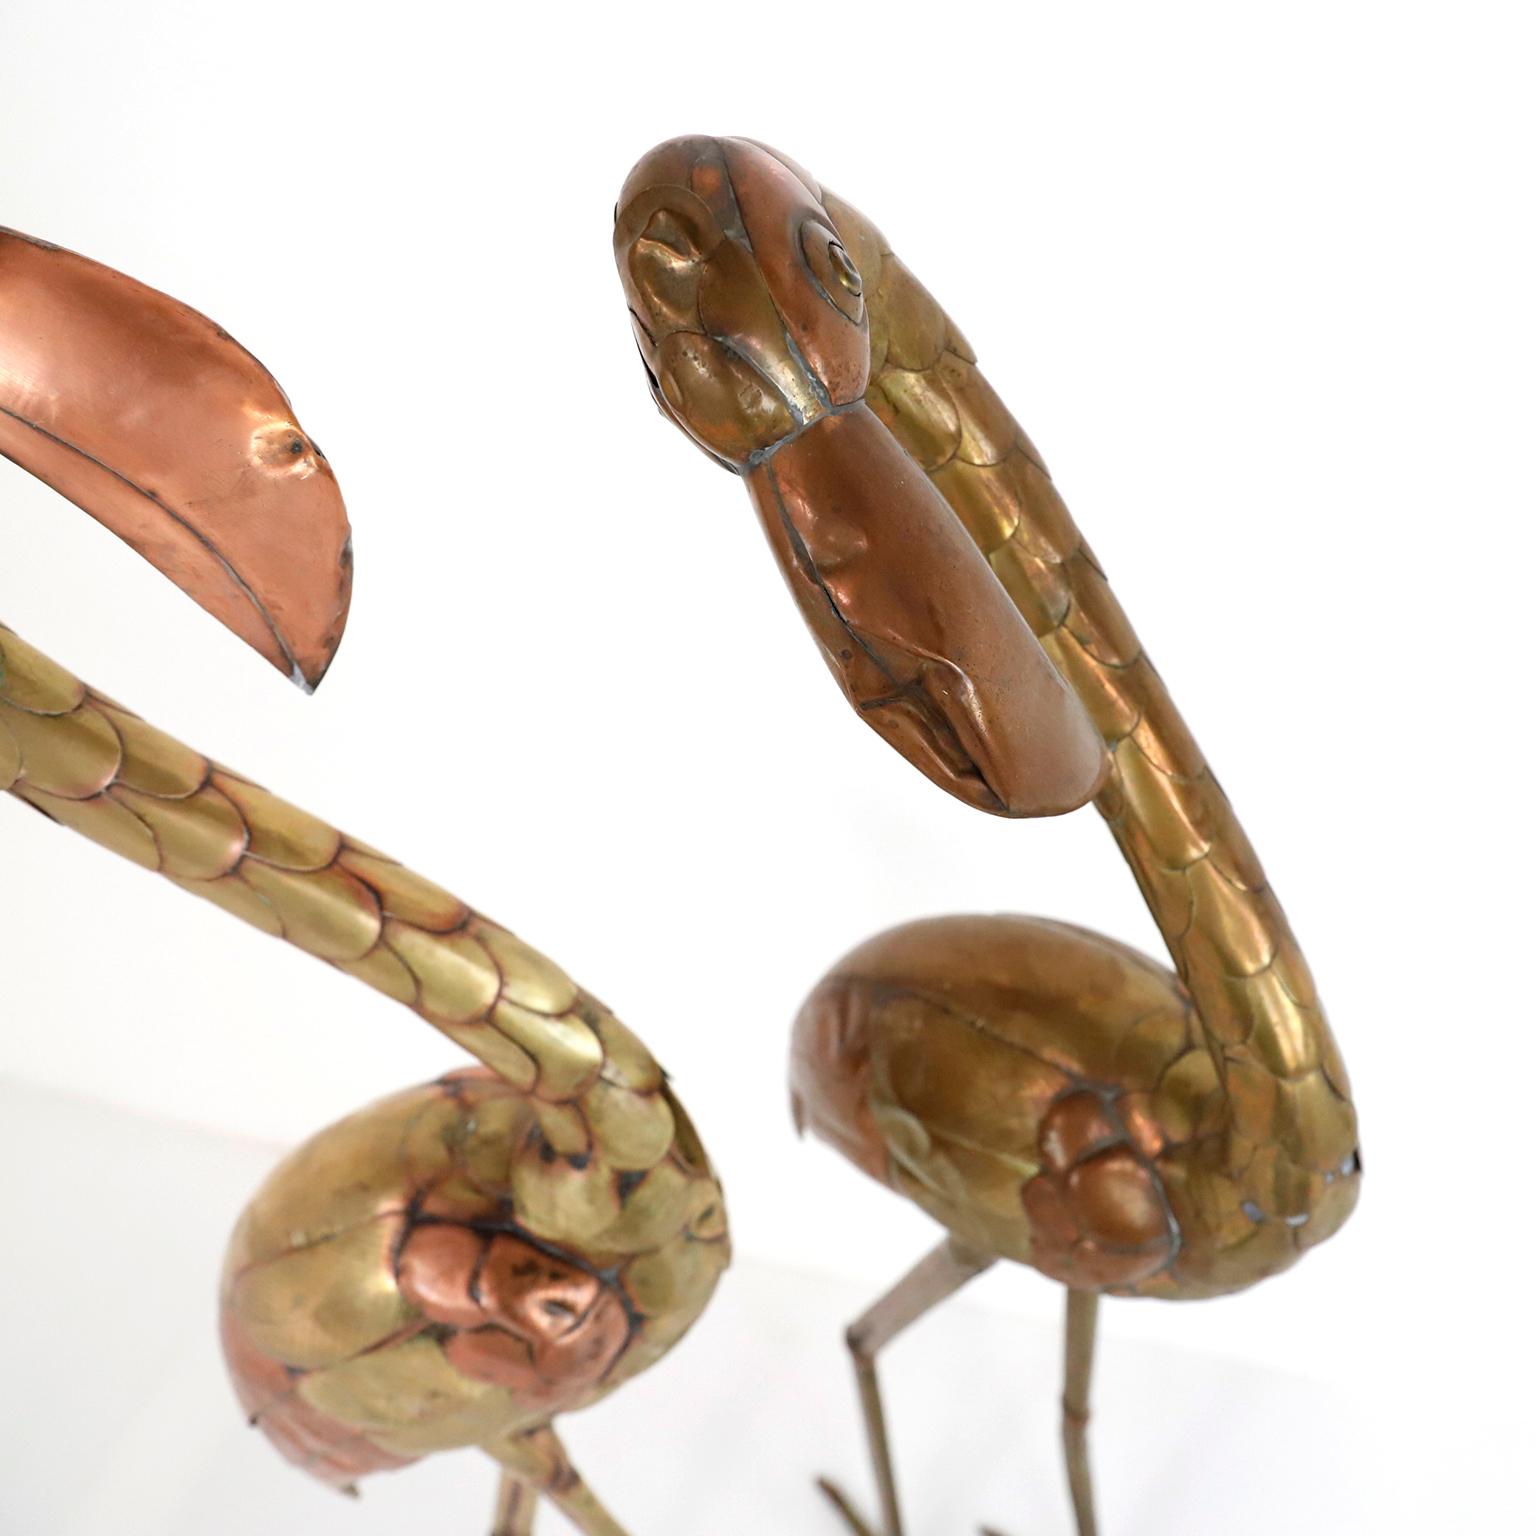 Mexican Pair of Flamingo Figures Attributed to Sergio Bustamante